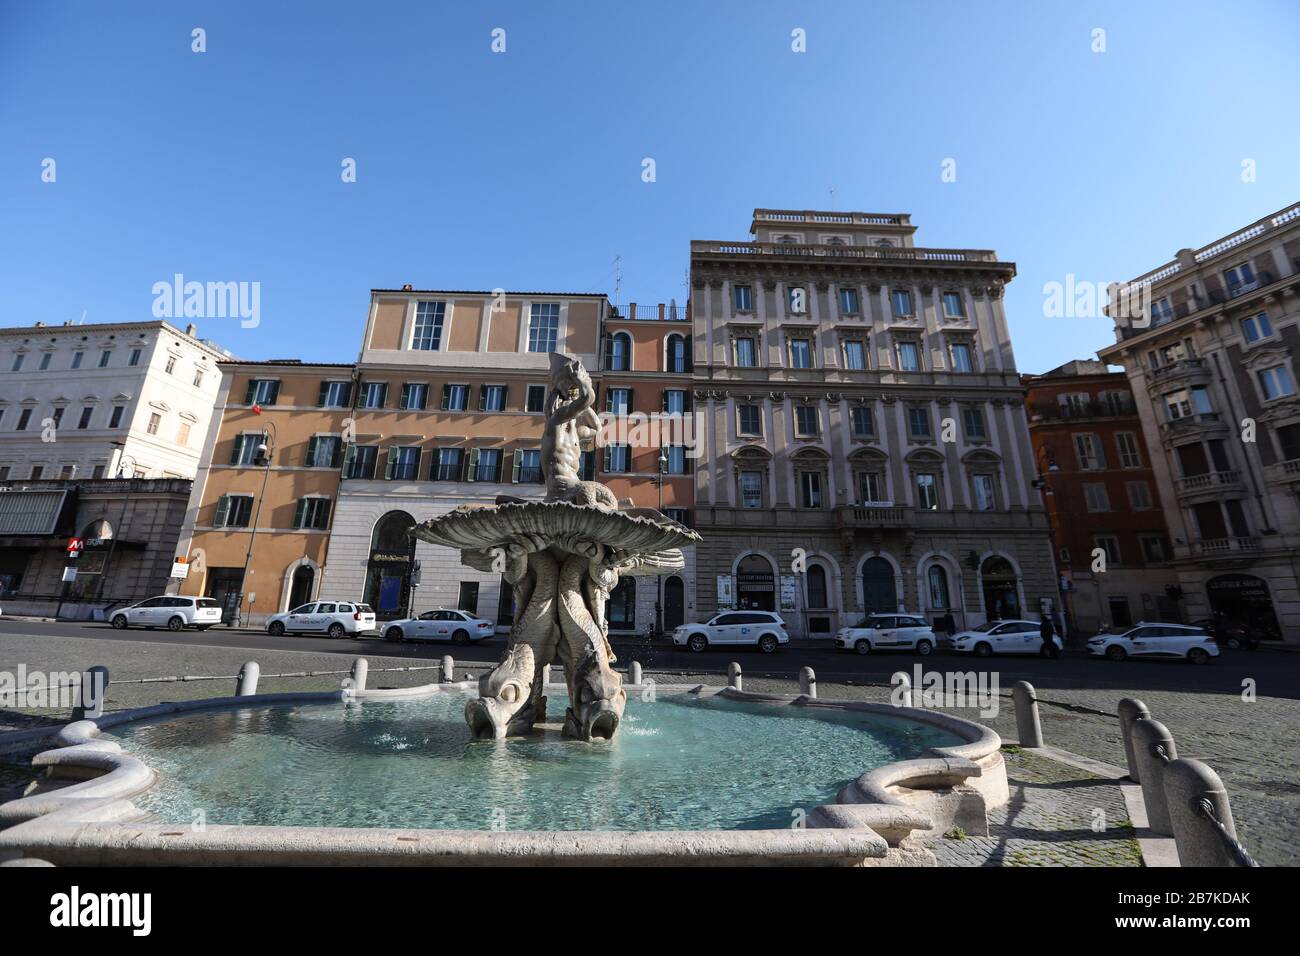 Rome, Italy. 16th Mar, 2020. Taxi drivers wait at a taxi stop on Piazza Barberini in Rome, Italy, March 16, 2020. Italy's accumulated number of confirmed cases rose to 27,980 on Monday from the tally of 24,747 on the previous day. Credit: Cheng Tingting/Xinhua/Alamy Live News Stock Photo